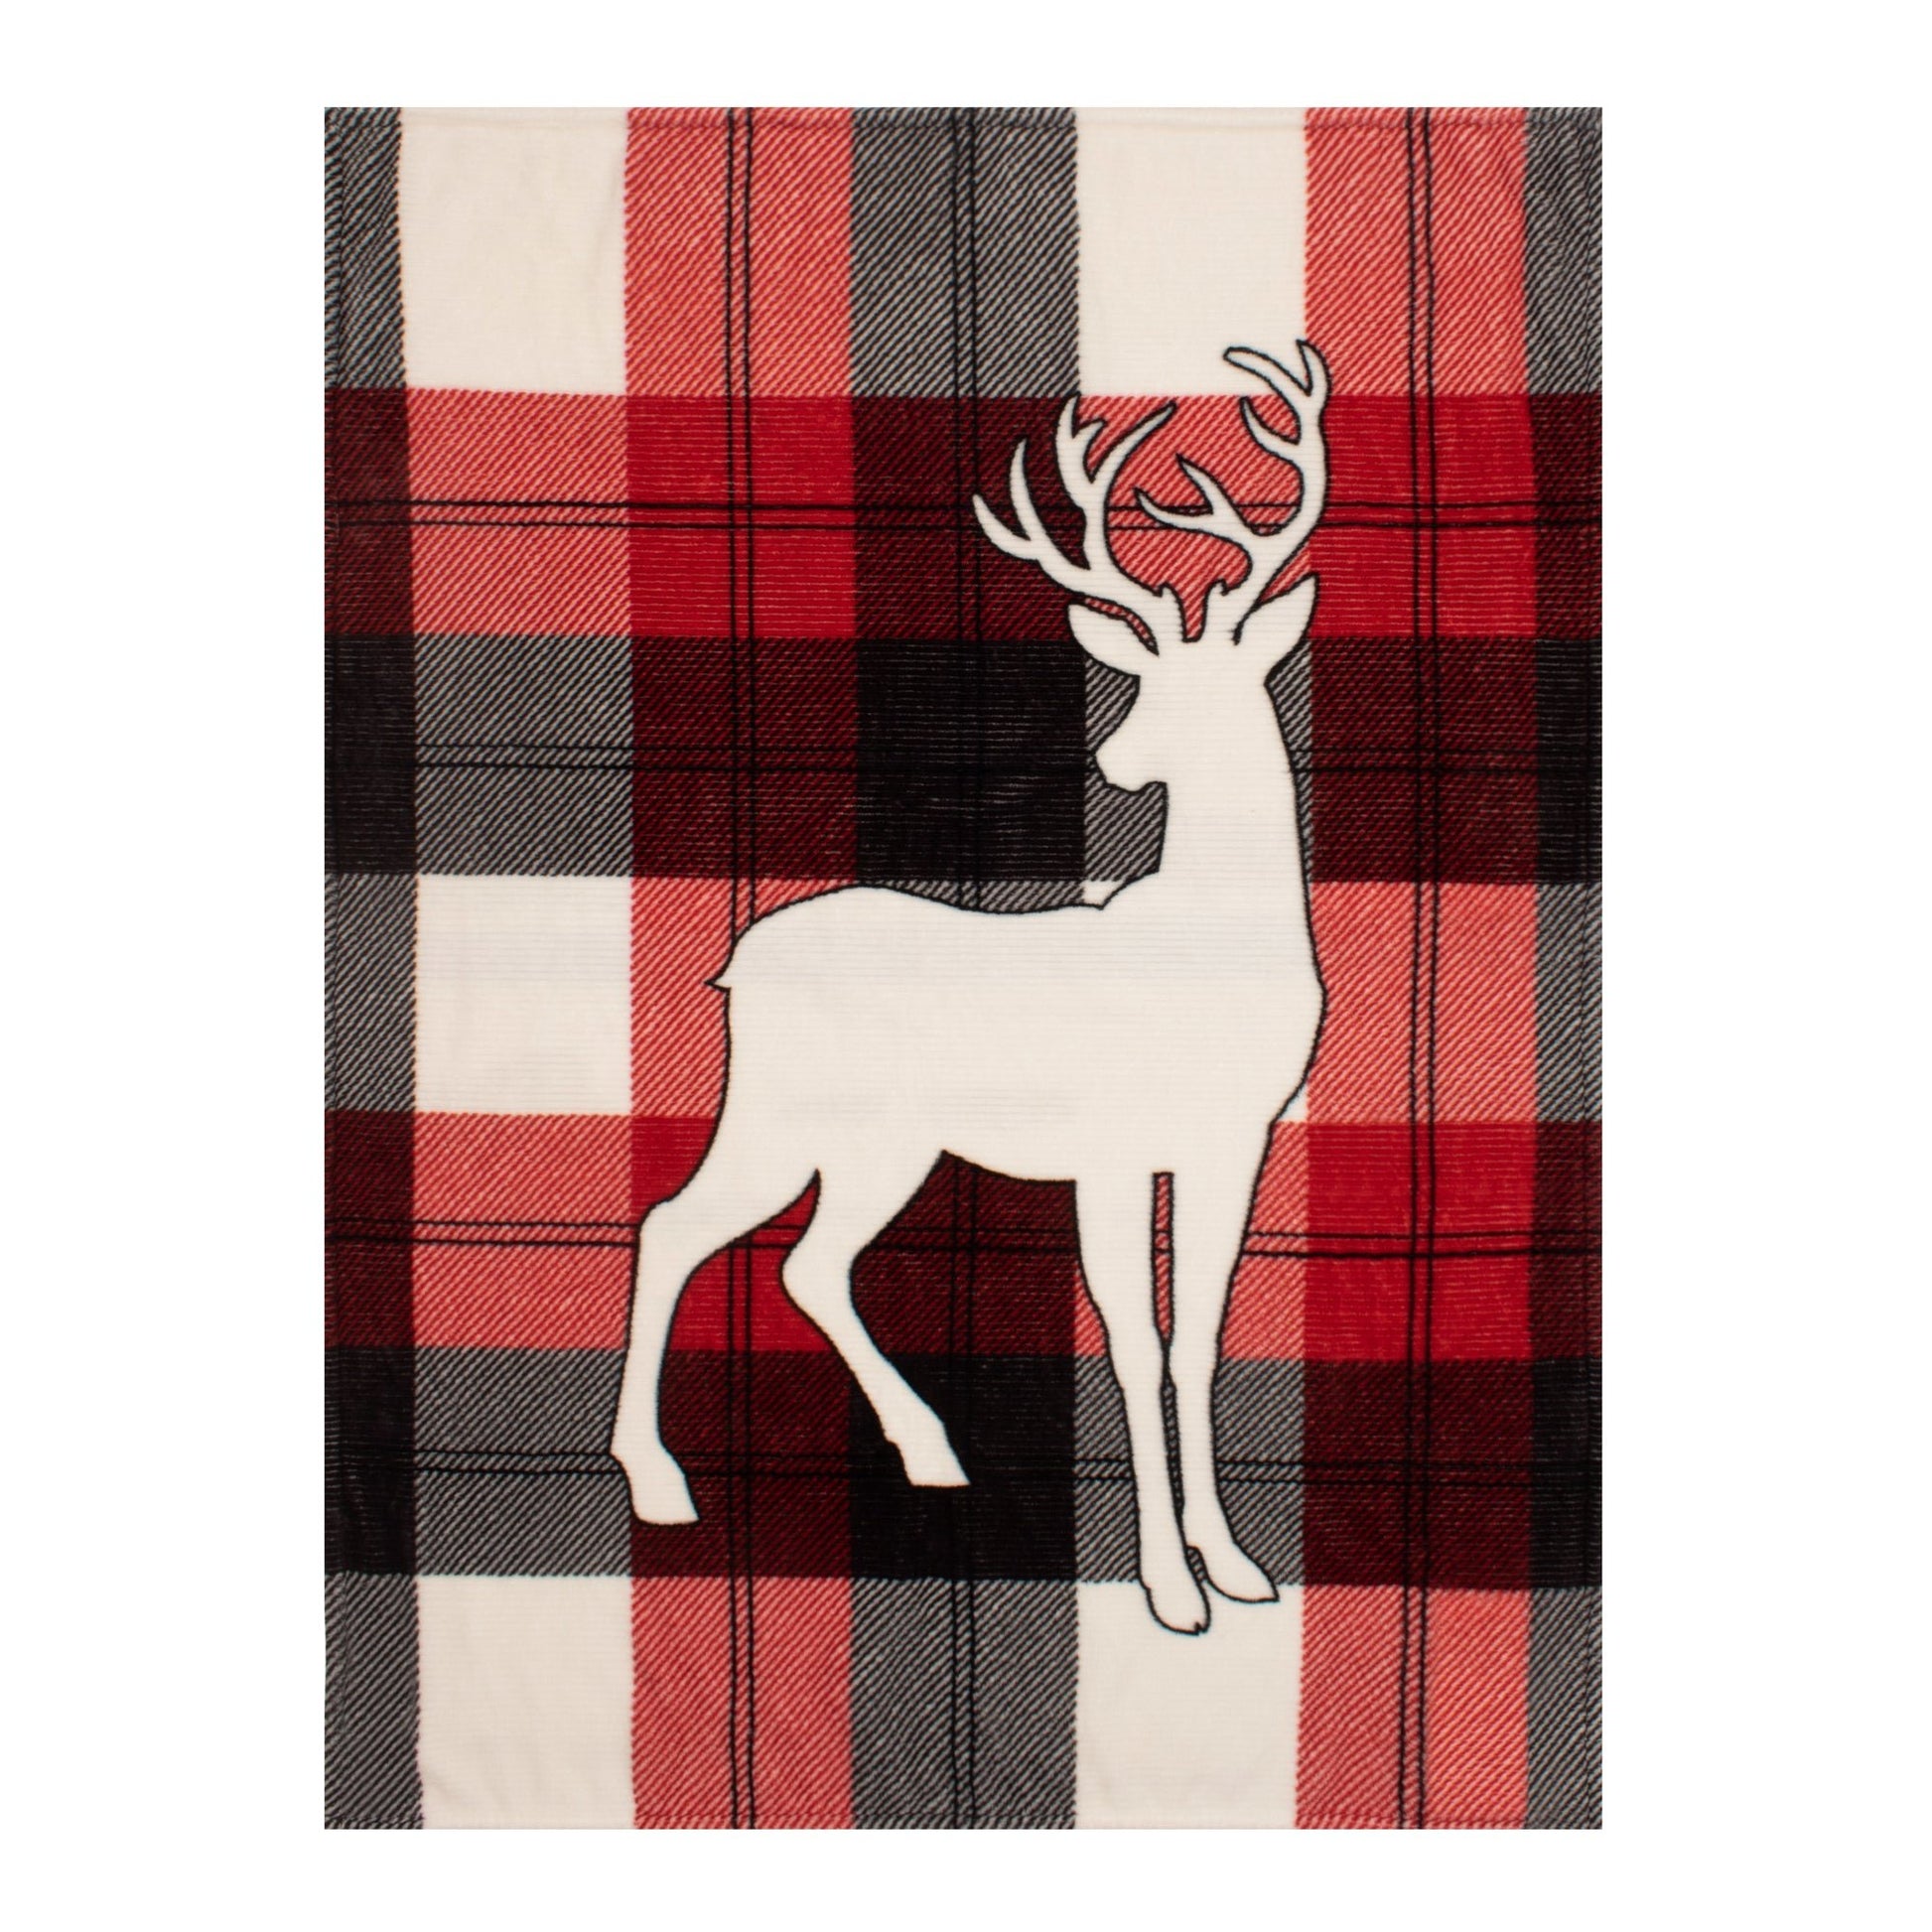 Super Soft Printed Knitted Blanket Throw Sherpa Home Decor Bedding Red Deer On Plaid - DecoElegance - Blanket Throw Home Bedding